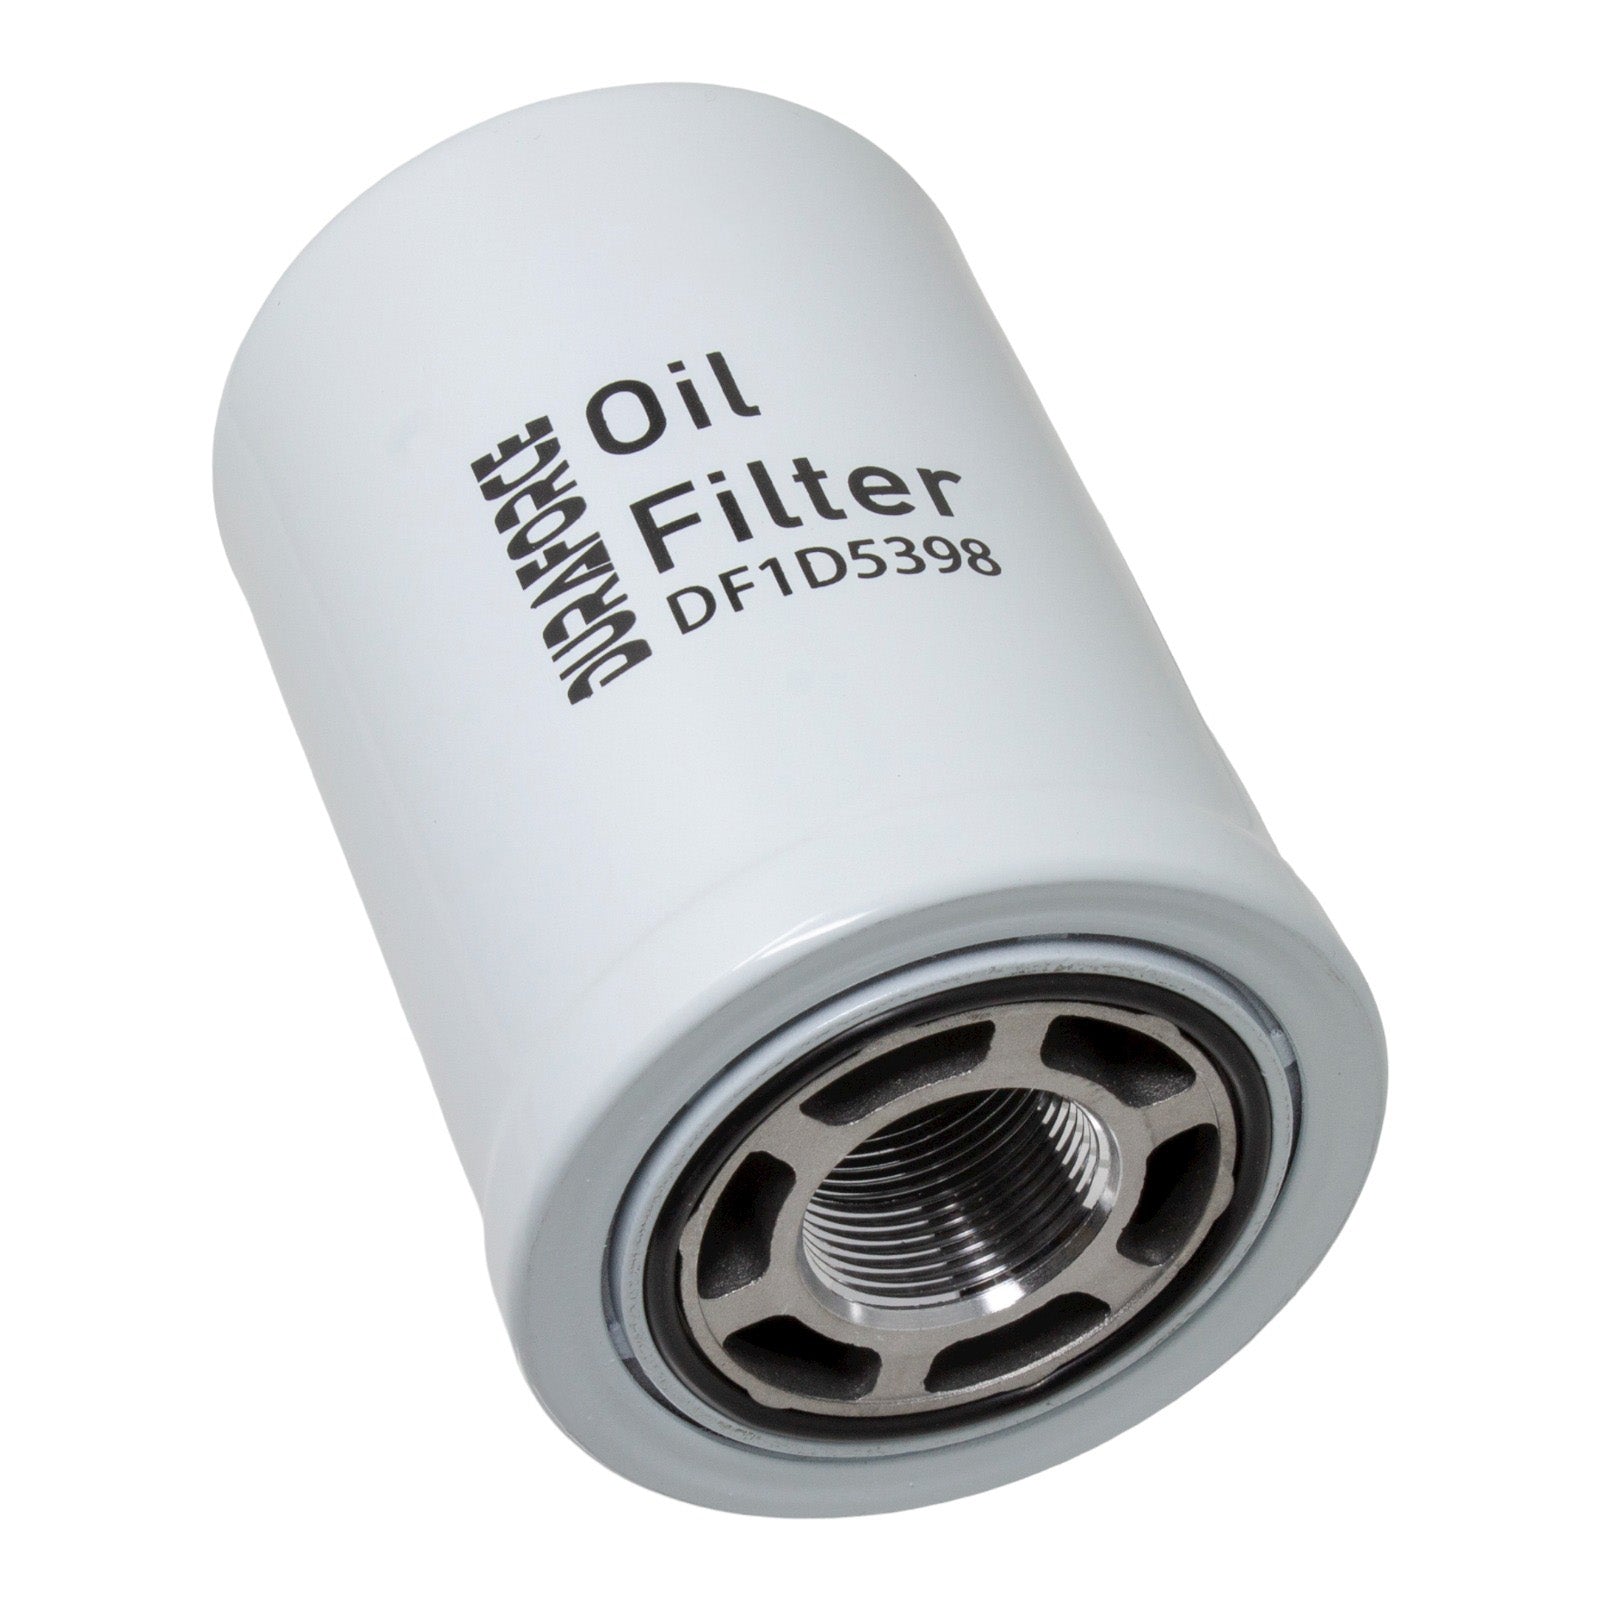 6661248, Hydraulic Oil Filter For Bobcat at Duraforce